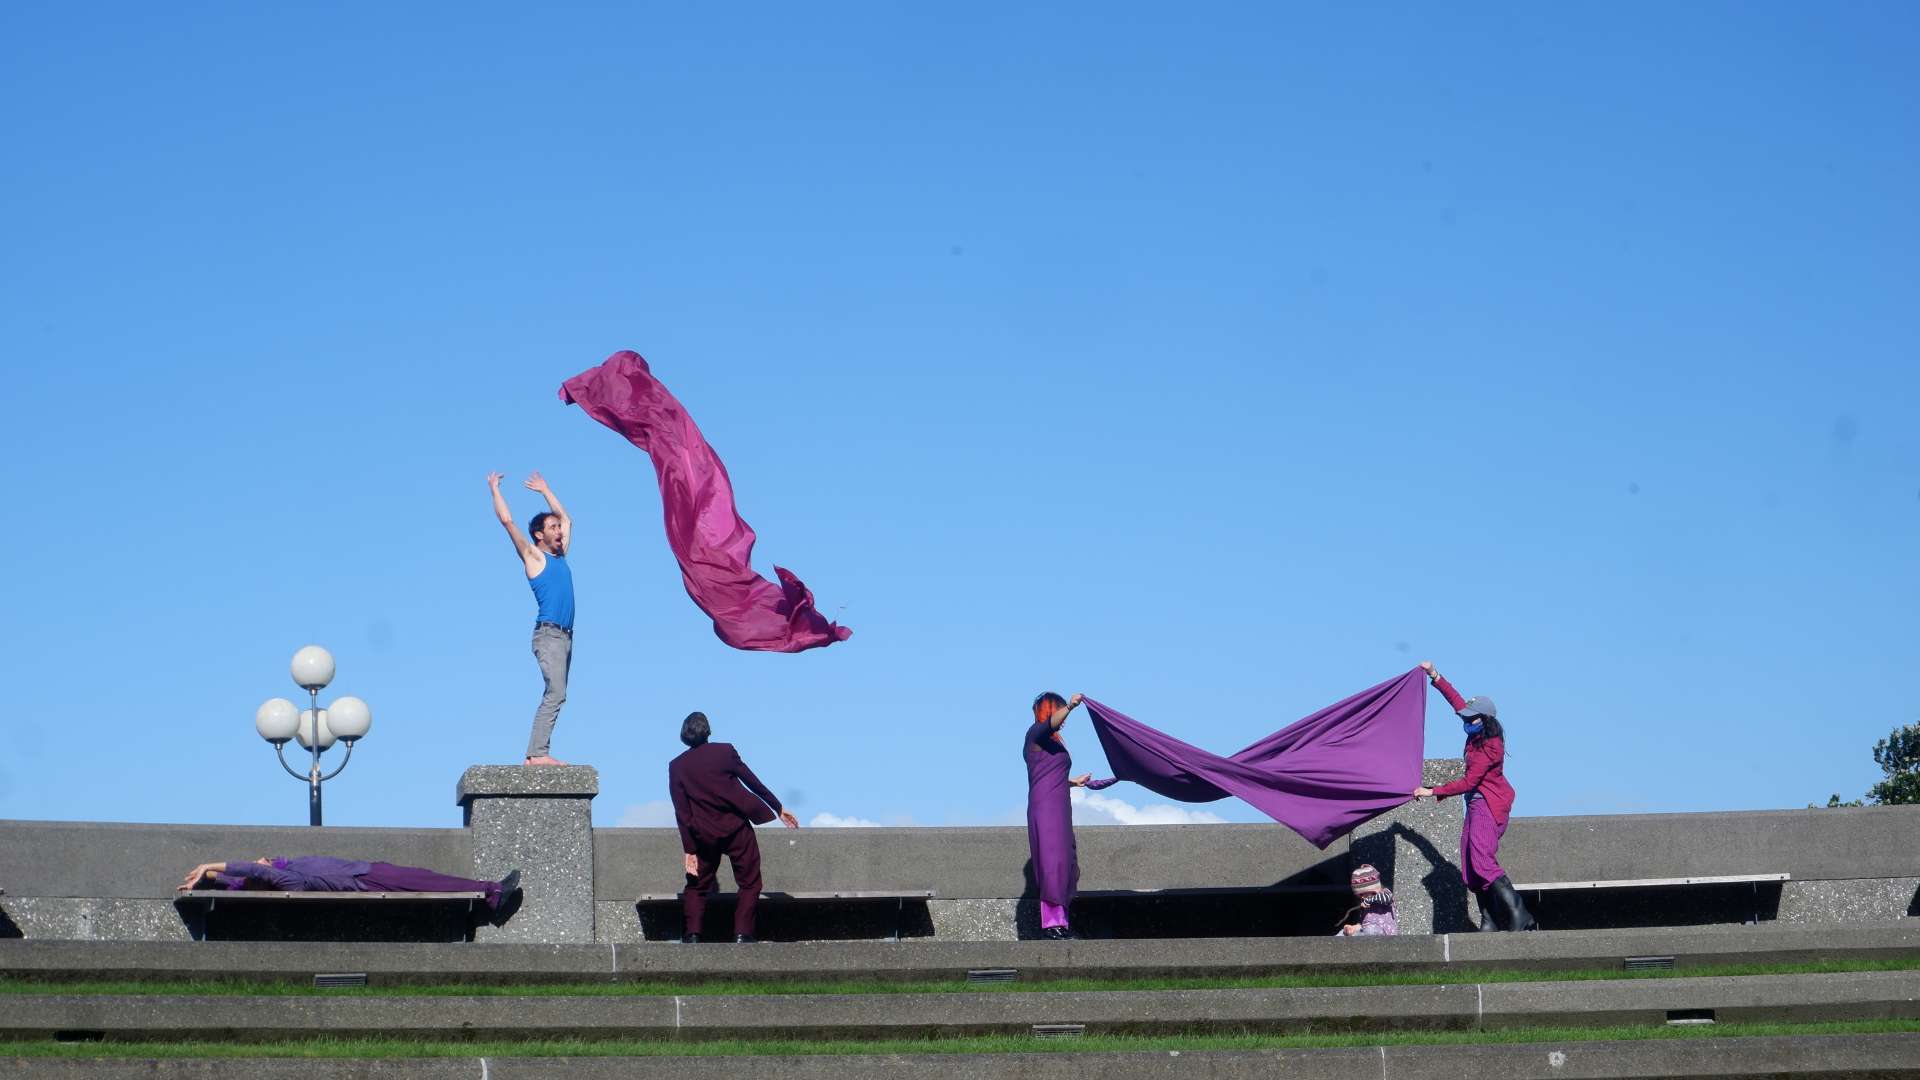 Wellington's Performance Art Week Aotearoa Is Taking Over the Capital with Immersive and Unique Live Acts